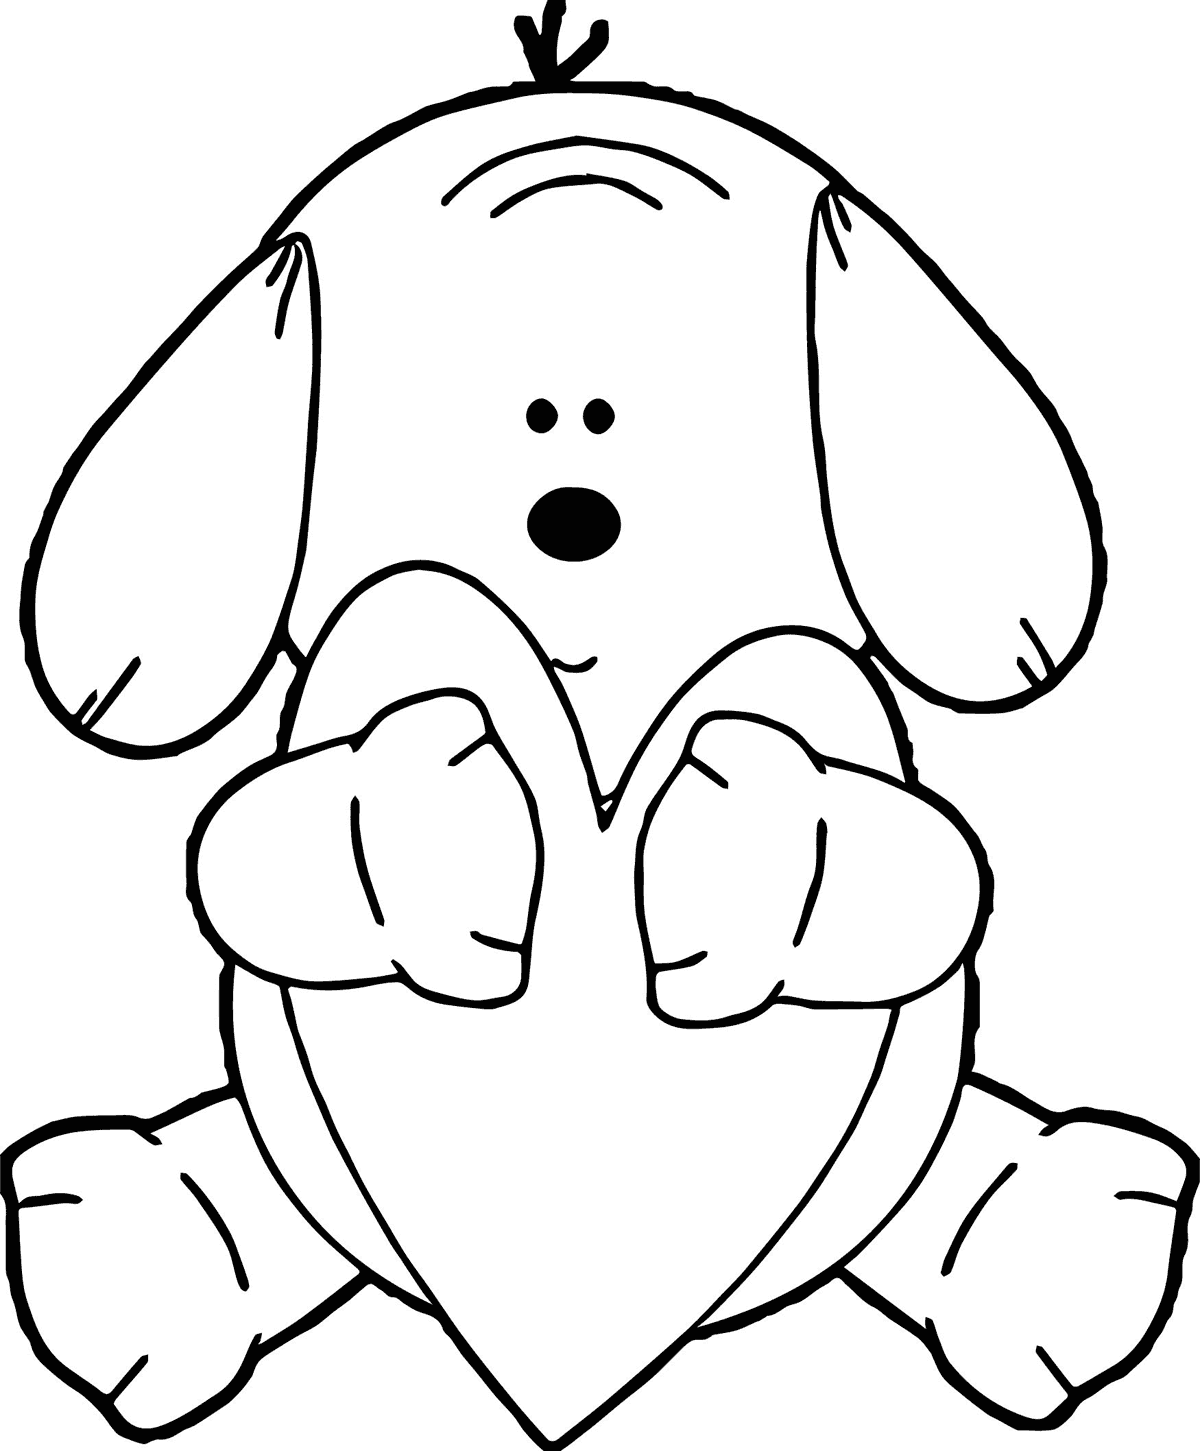 Puppy Heart Coloring Page